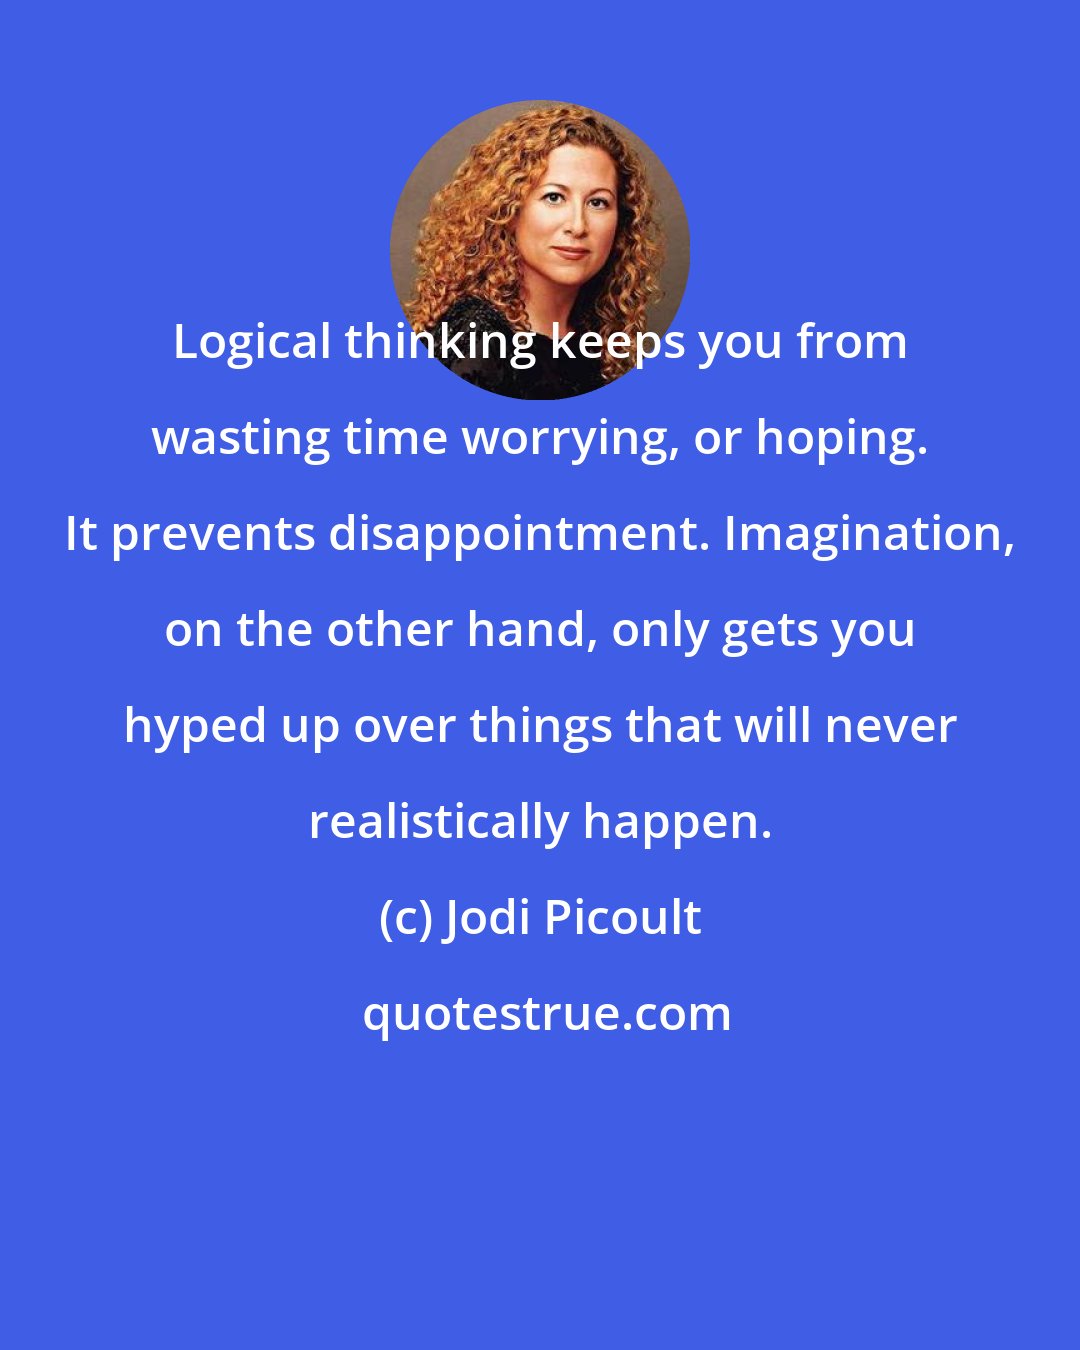 Jodi Picoult: Logical thinking keeps you from wasting time worrying, or hoping. It prevents disappointment. Imagination, on the other hand, only gets you hyped up over things that will never realistically happen.